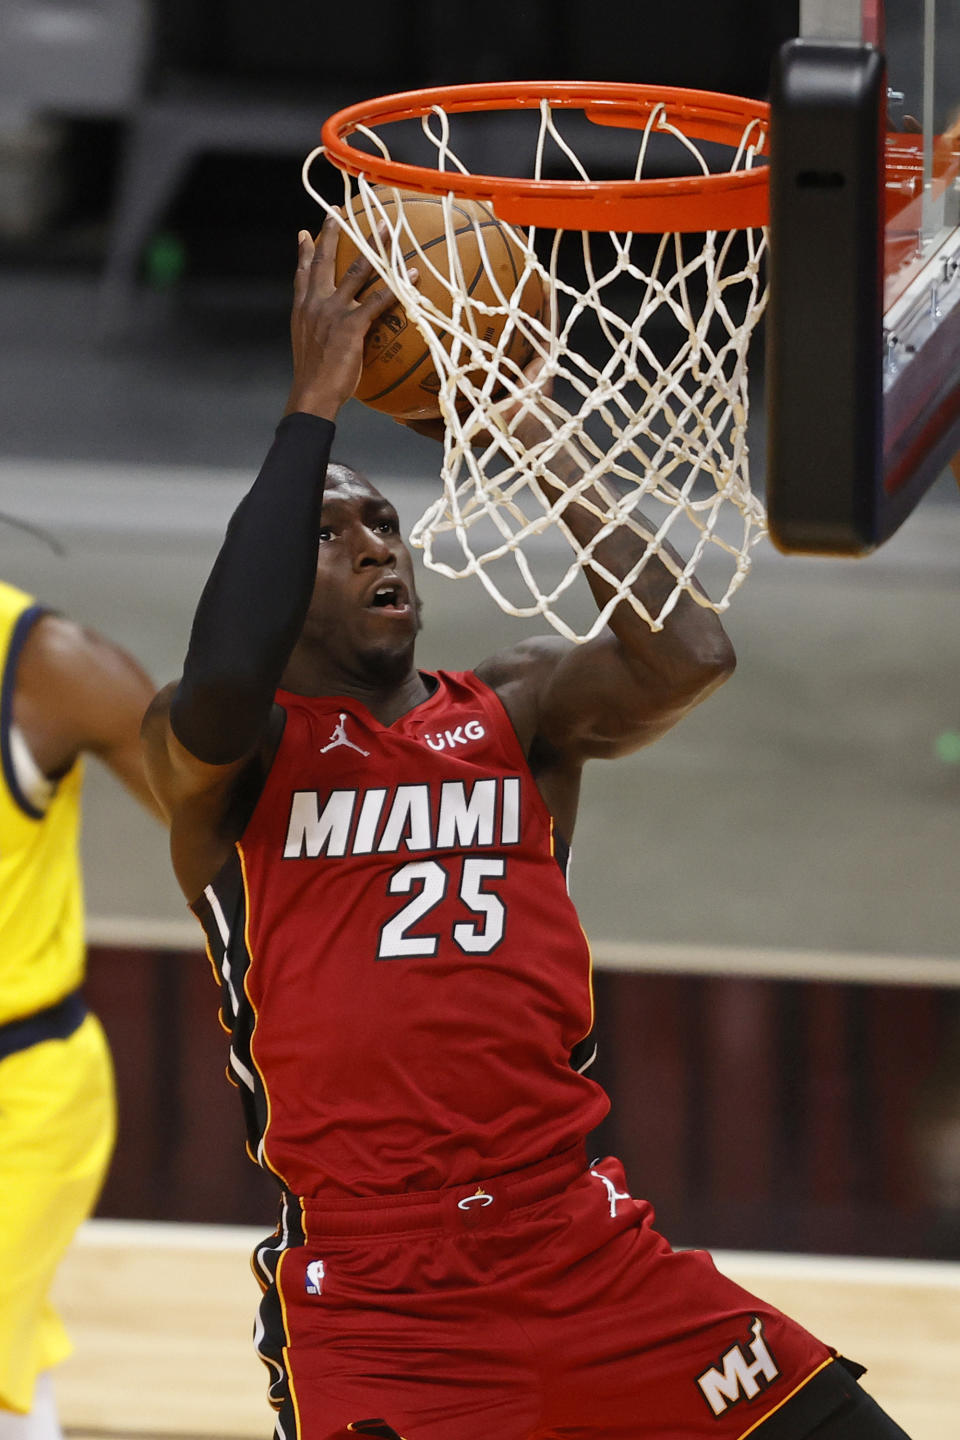 Miami Heat guard Kendrick Nunn (25) scores against the Indiana Pacers during the second half of an NBA basketball game Friday, March 19, 2021, in Miami. (AP Photo/Joel Auerbach)